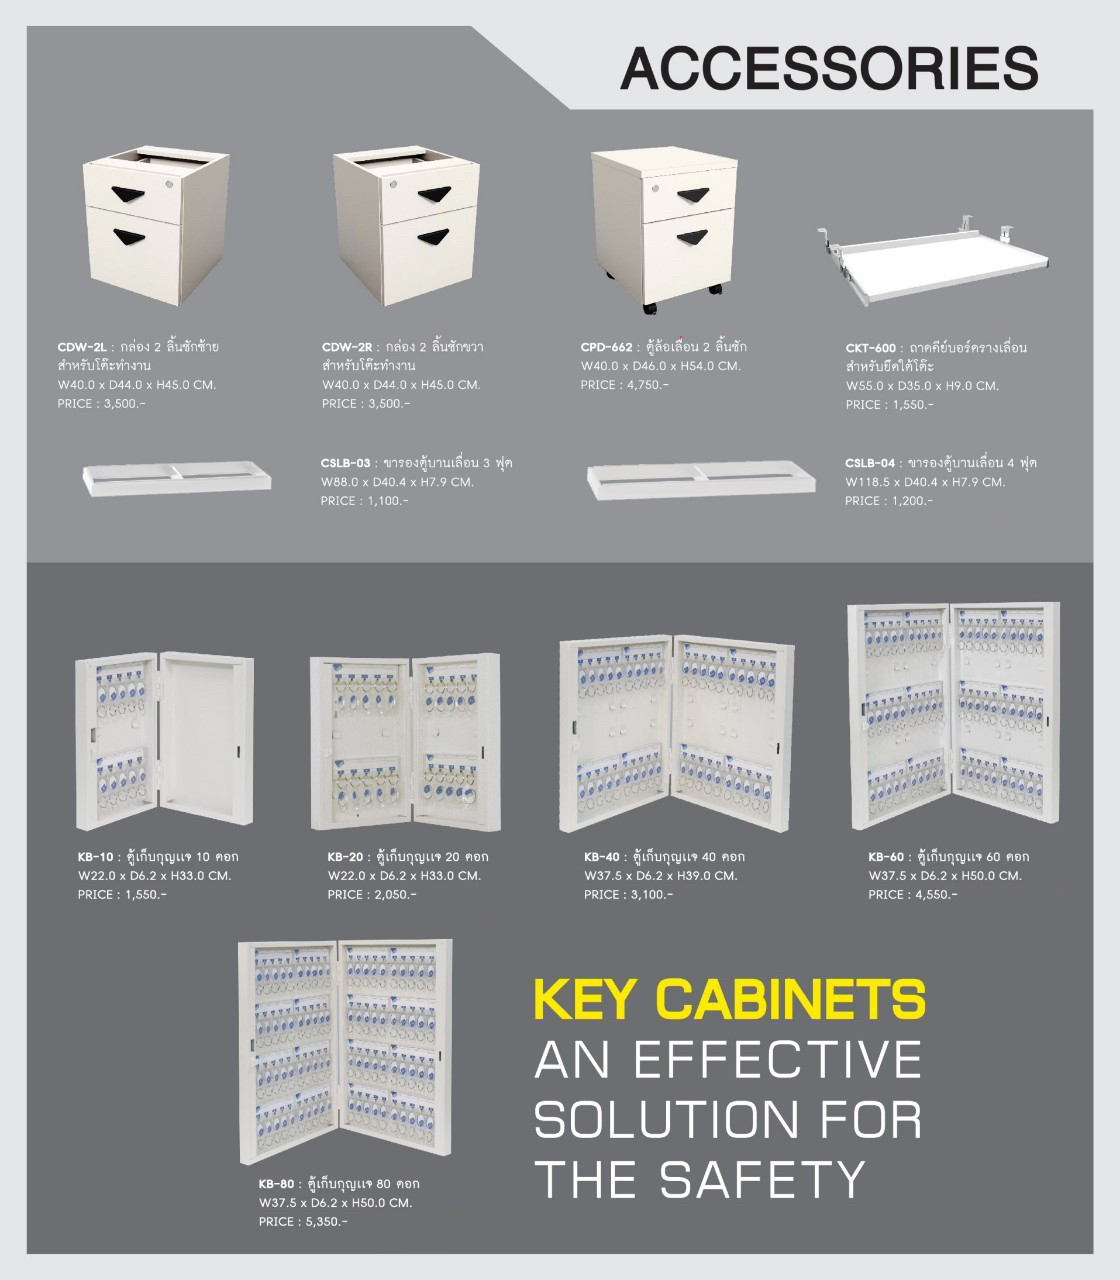 09061::CPD-662::A Sure cabinet with 2 drawers and keylocks. Dimension (WxDxH) cm : 40x46x54. Available in White